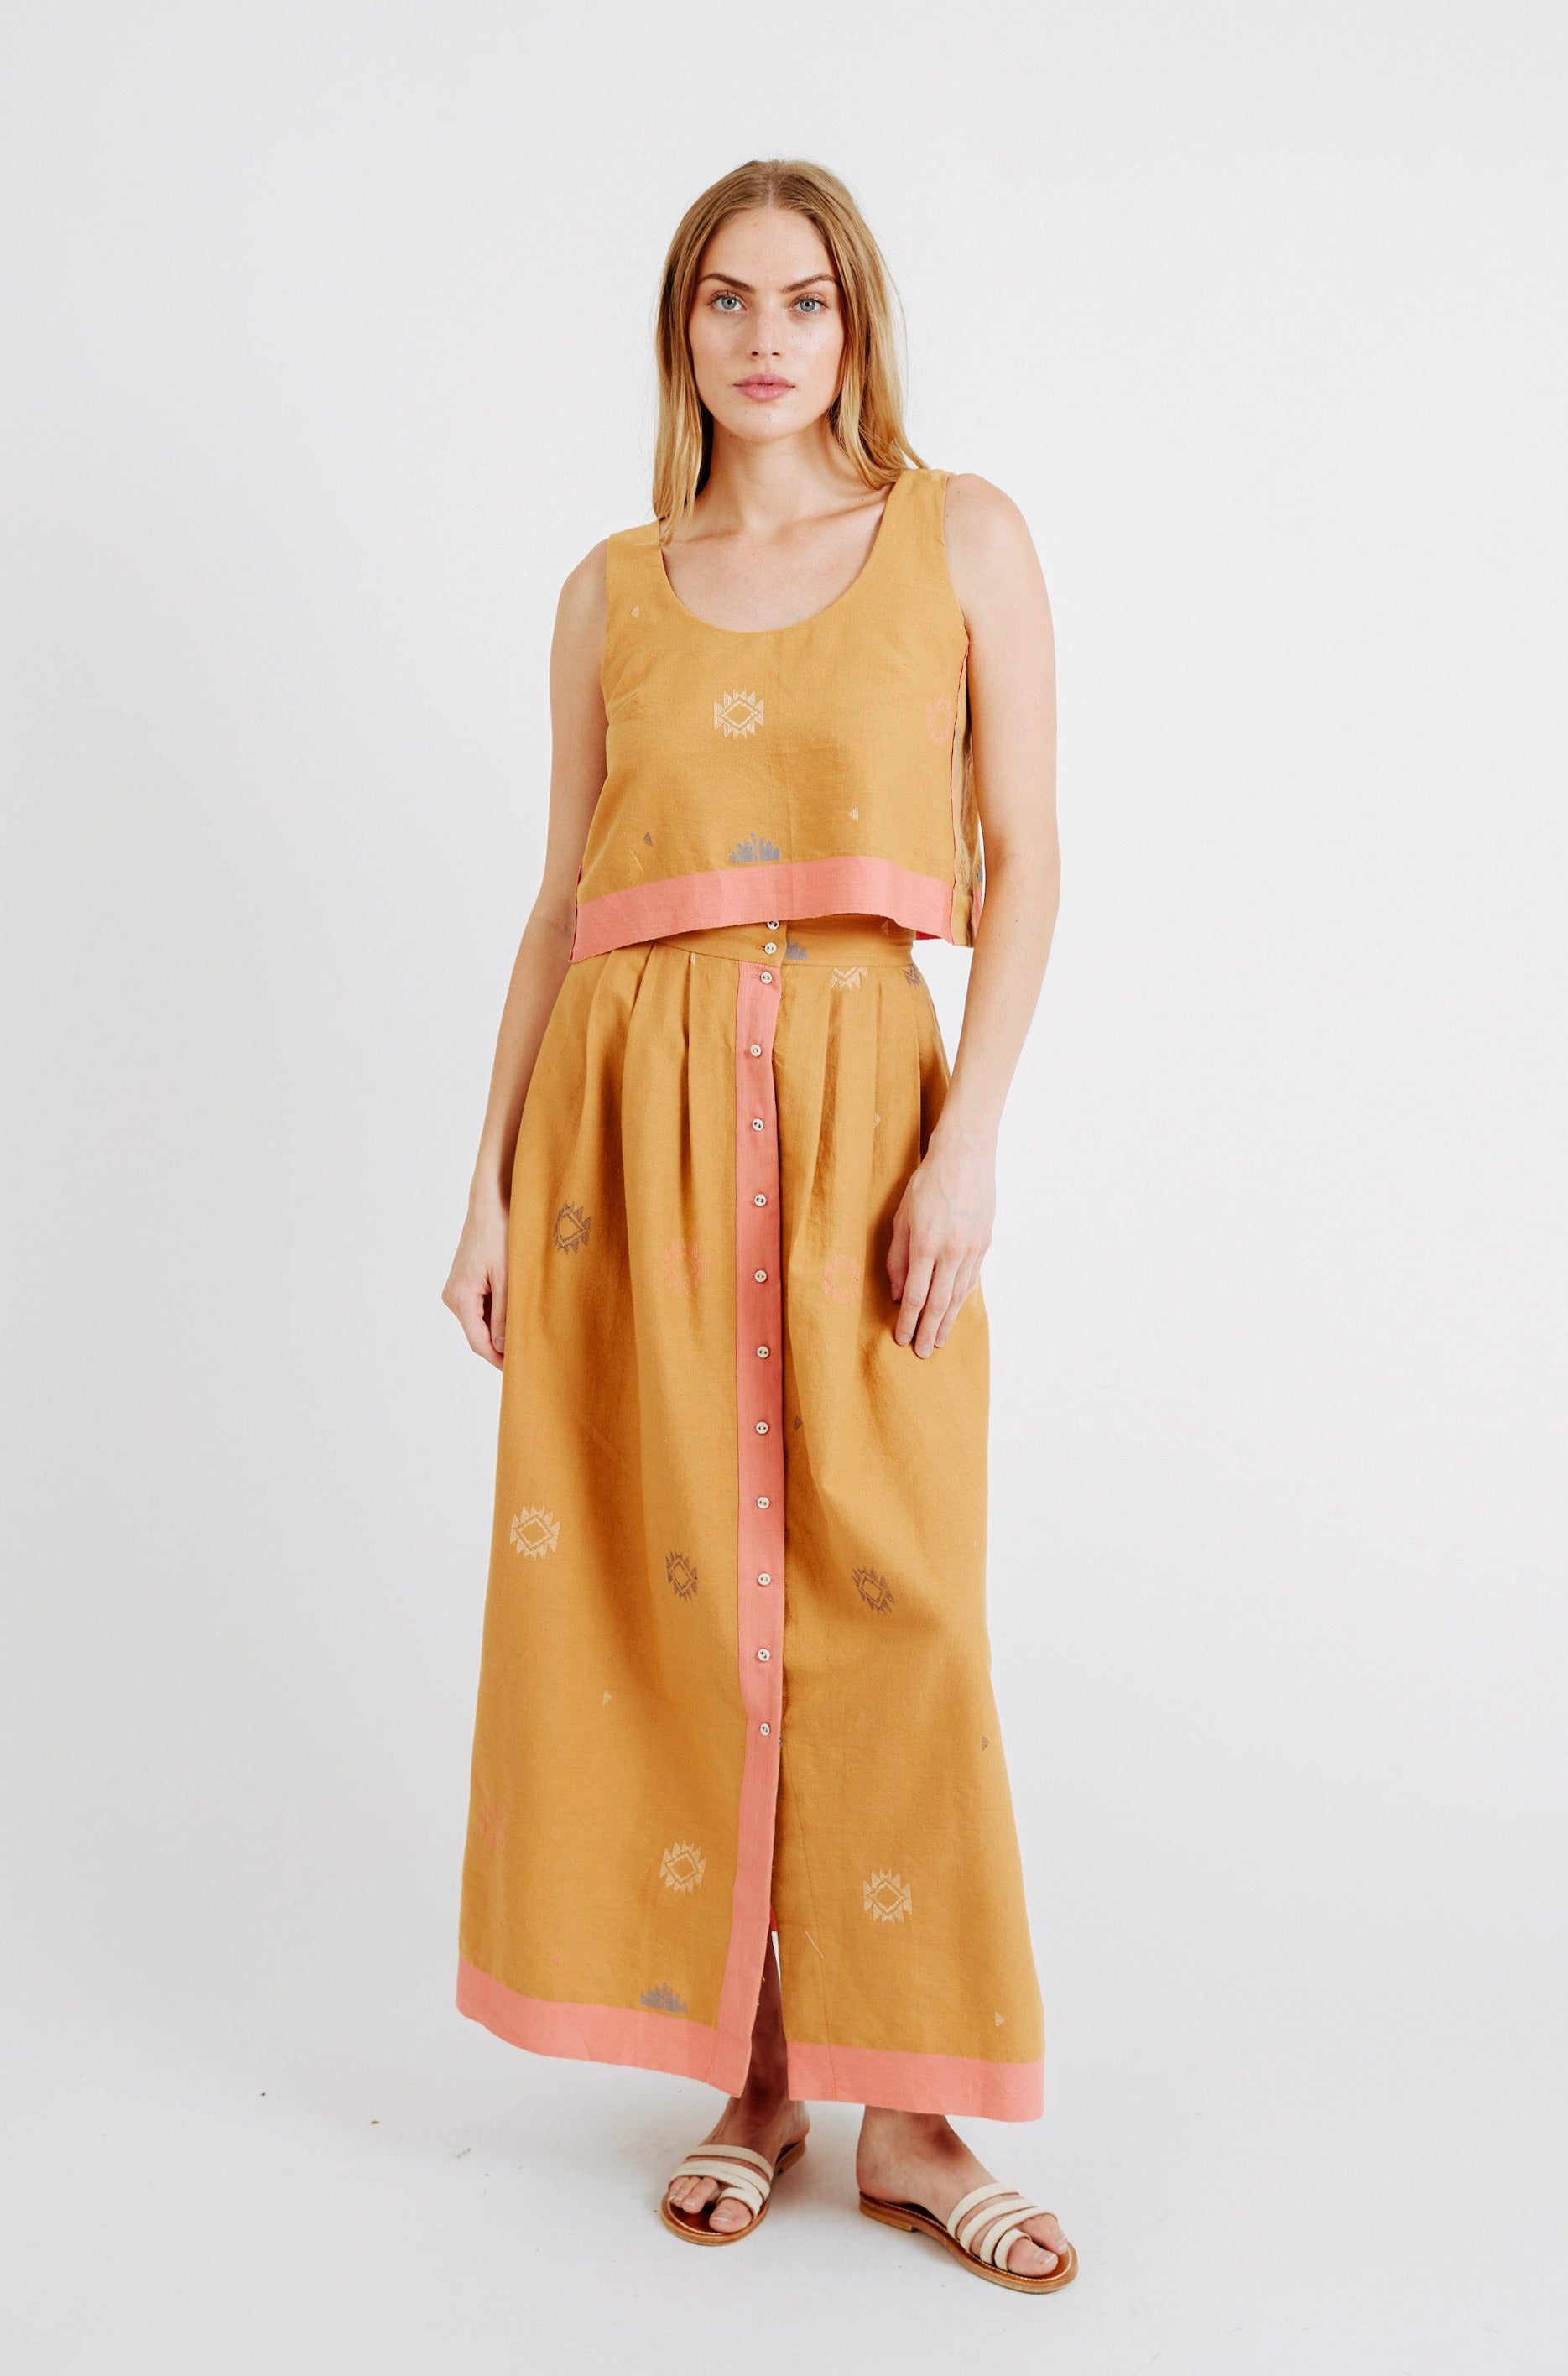 A statement maxi skirt for transitioning to warmer temps featuring jamdani, a weaving technique native to West Bengal. Ethically made with 100% cotton in India.